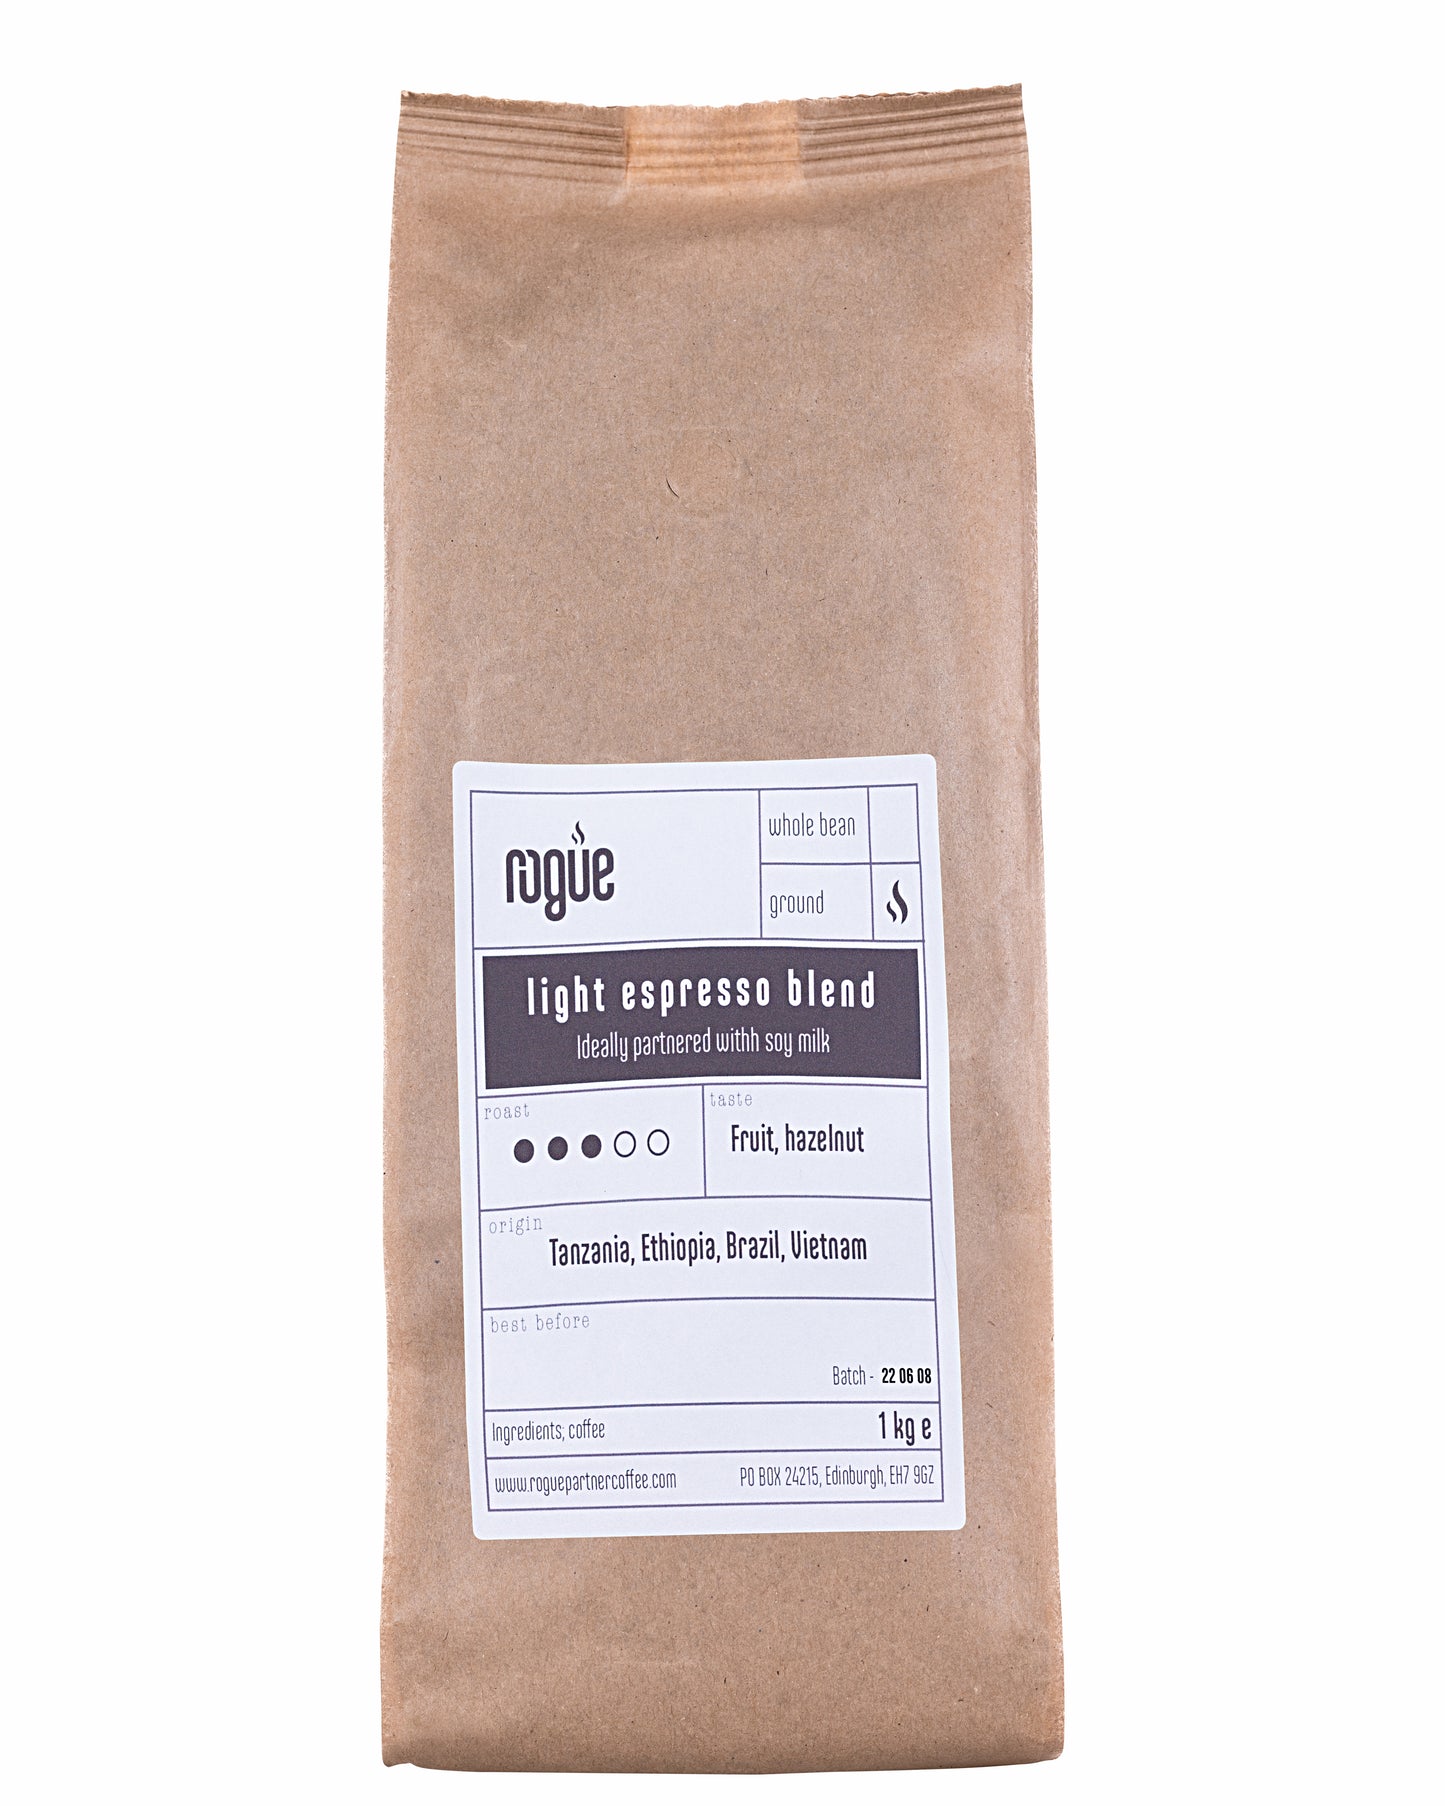 1kg kraft bag of light espresso blend roast ground coffee from Rogue Partner Coffee. Tasting notes are dark chocolate. The origins of the beans are Tanzania, Ethiopia, Brazil and Vietnam